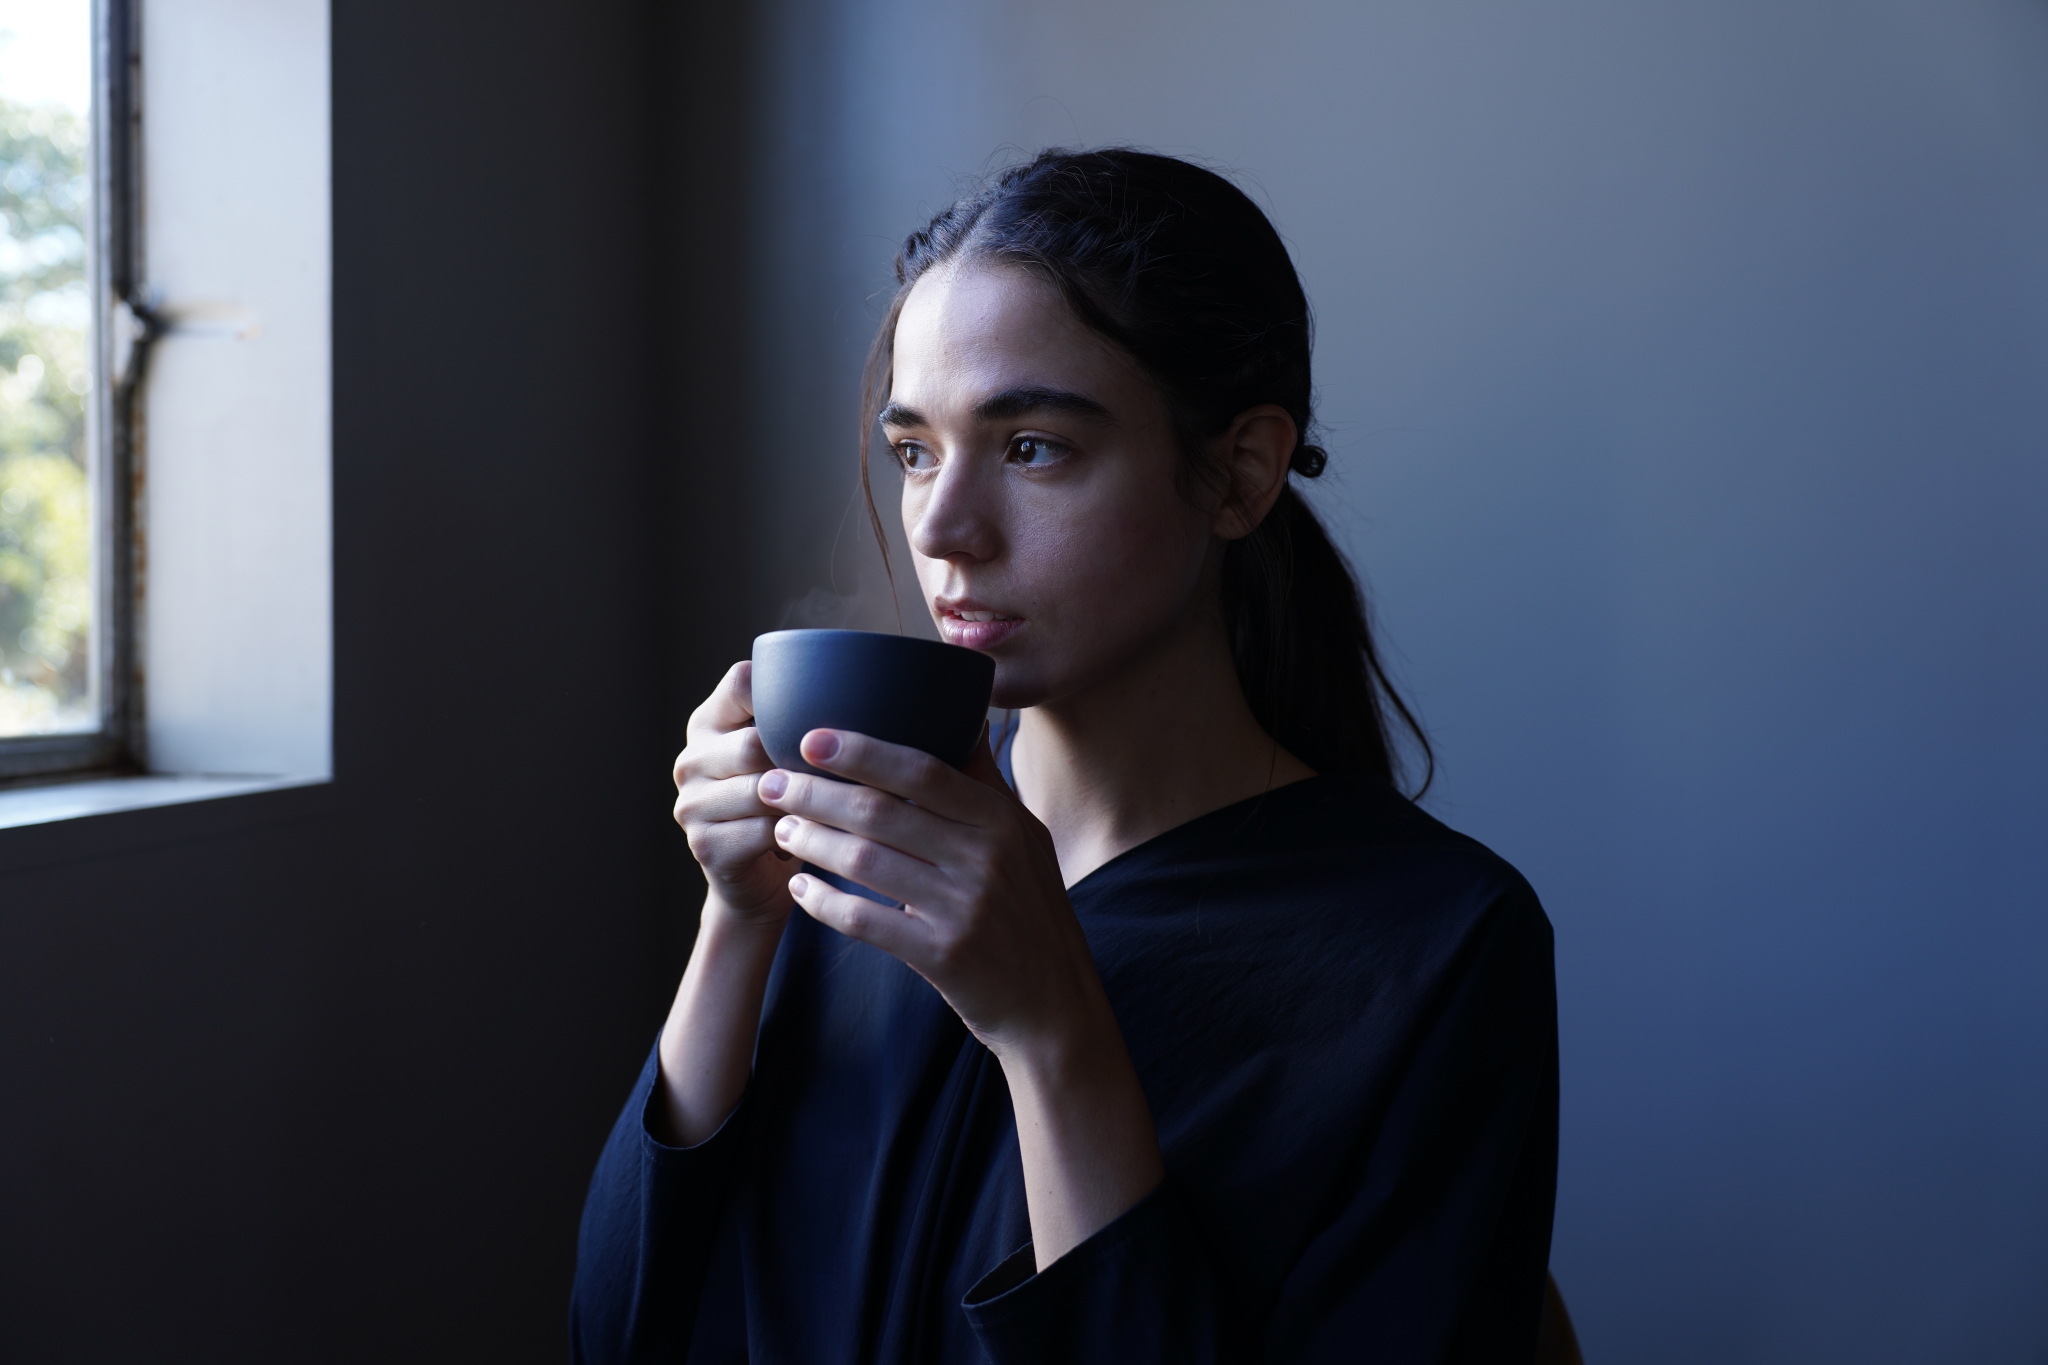 Female model sipping a cup of tea looking towards a window